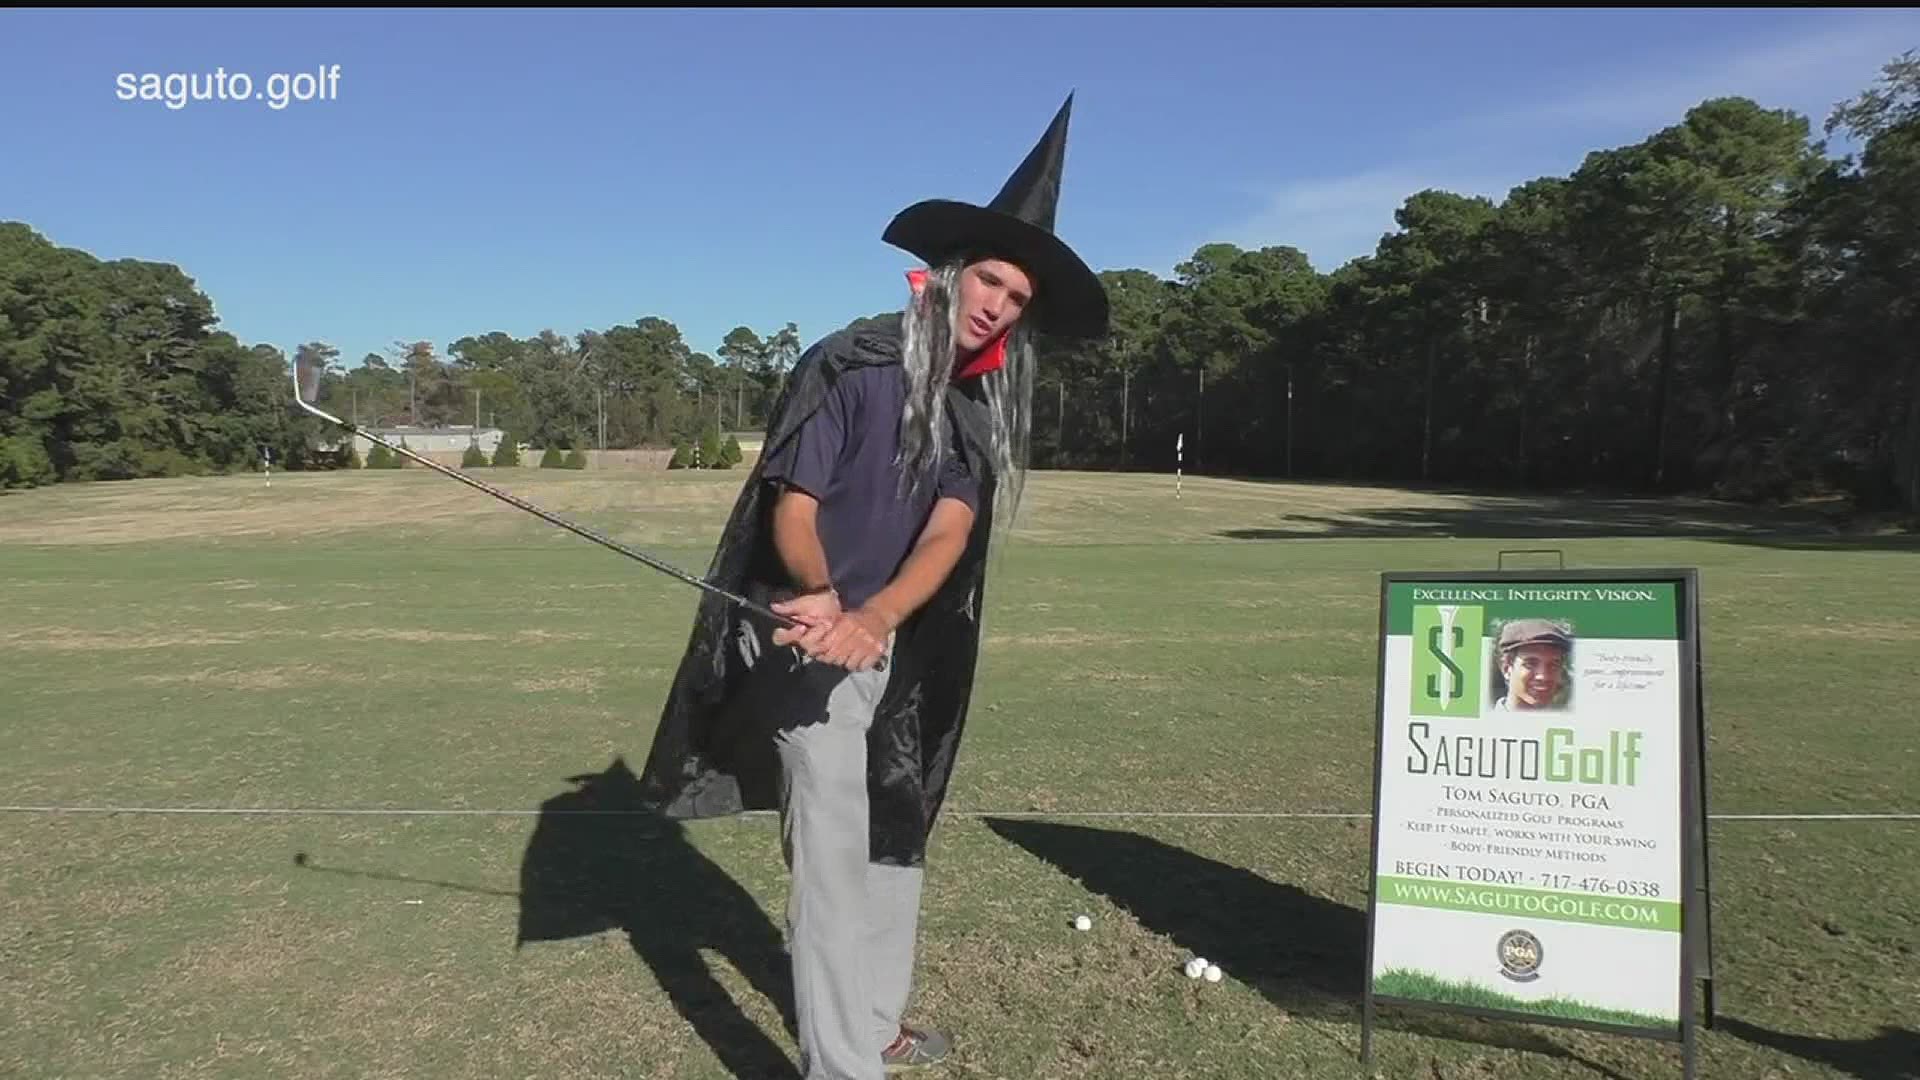 Bermudian Springs grad Tom Saguto has been teaching a body-friendly golf swing for some time and his unique tips are starting to go viral.